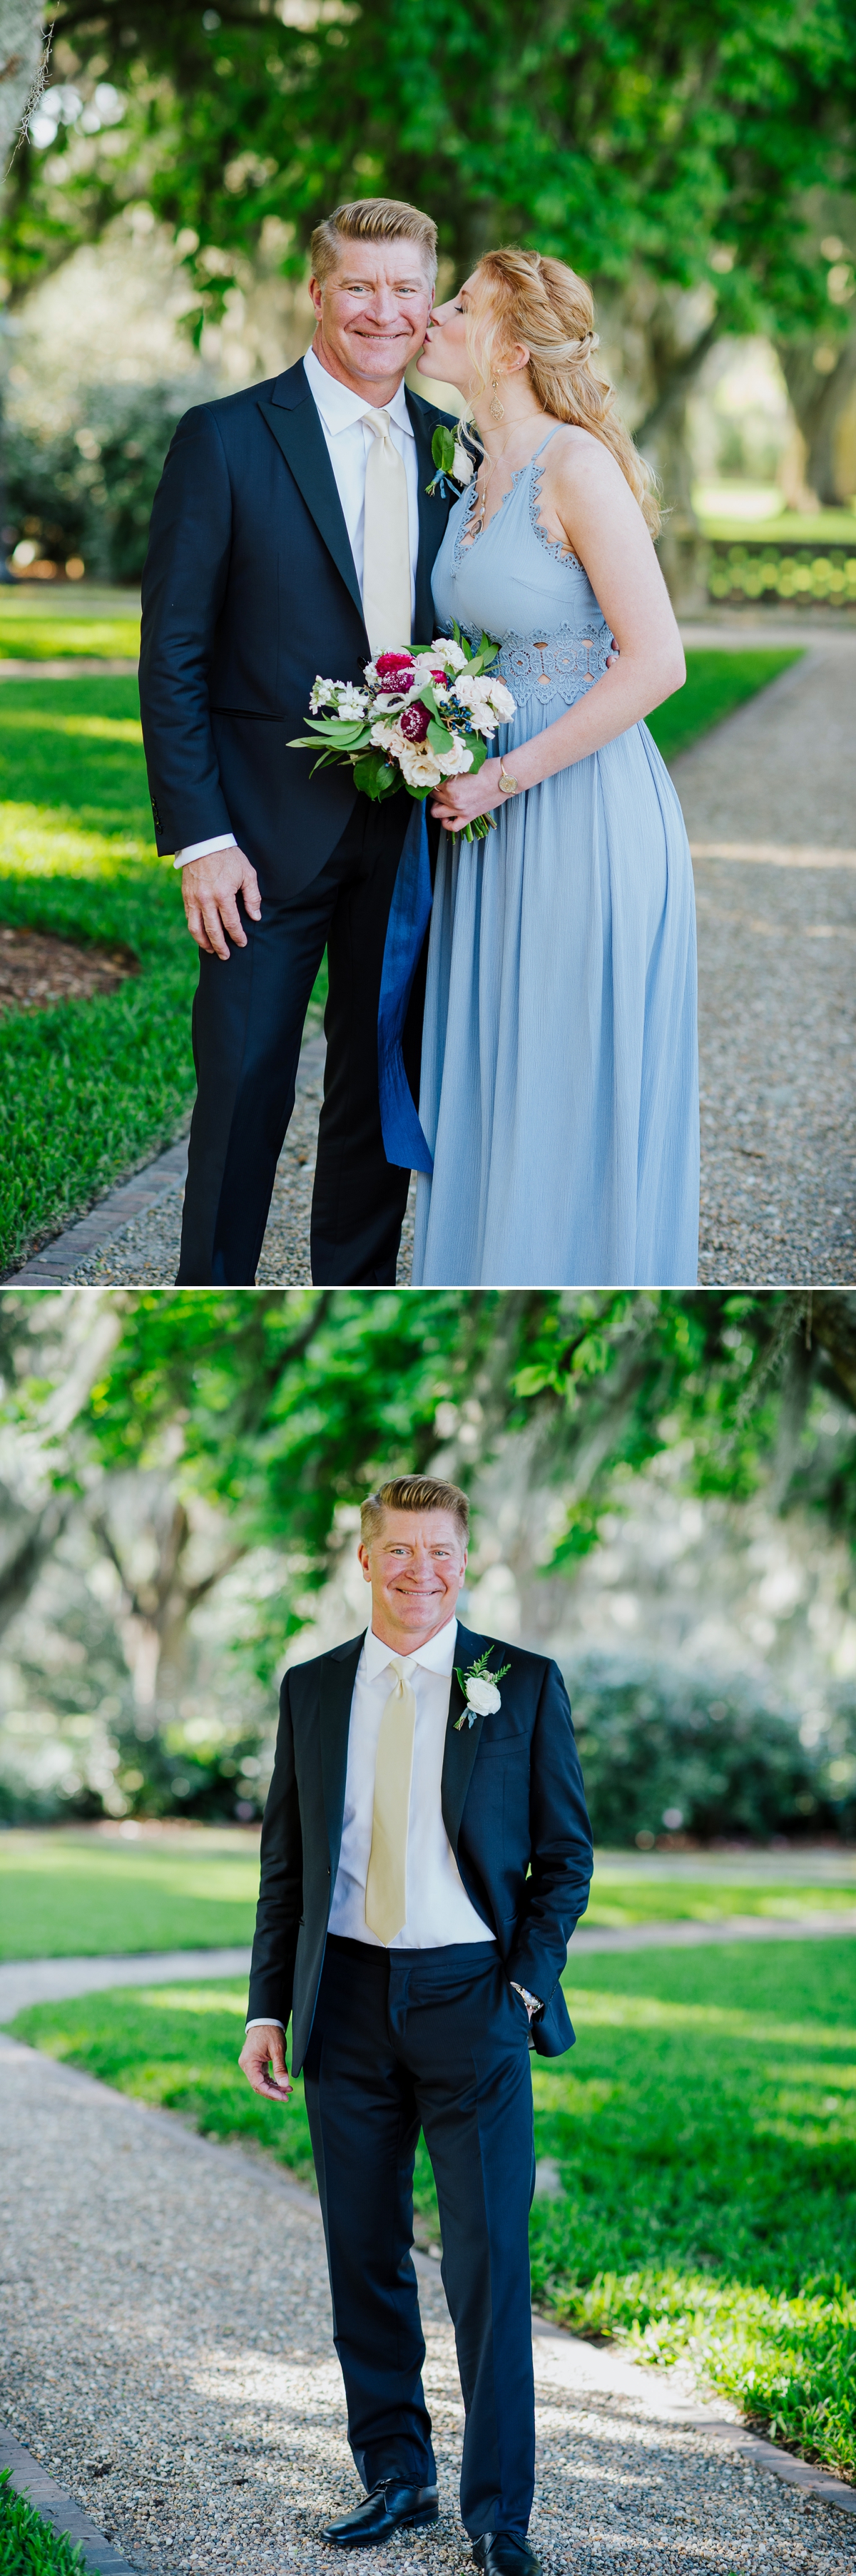 Lauren and Rob’s Spring Wedding at Ford Field and River Club